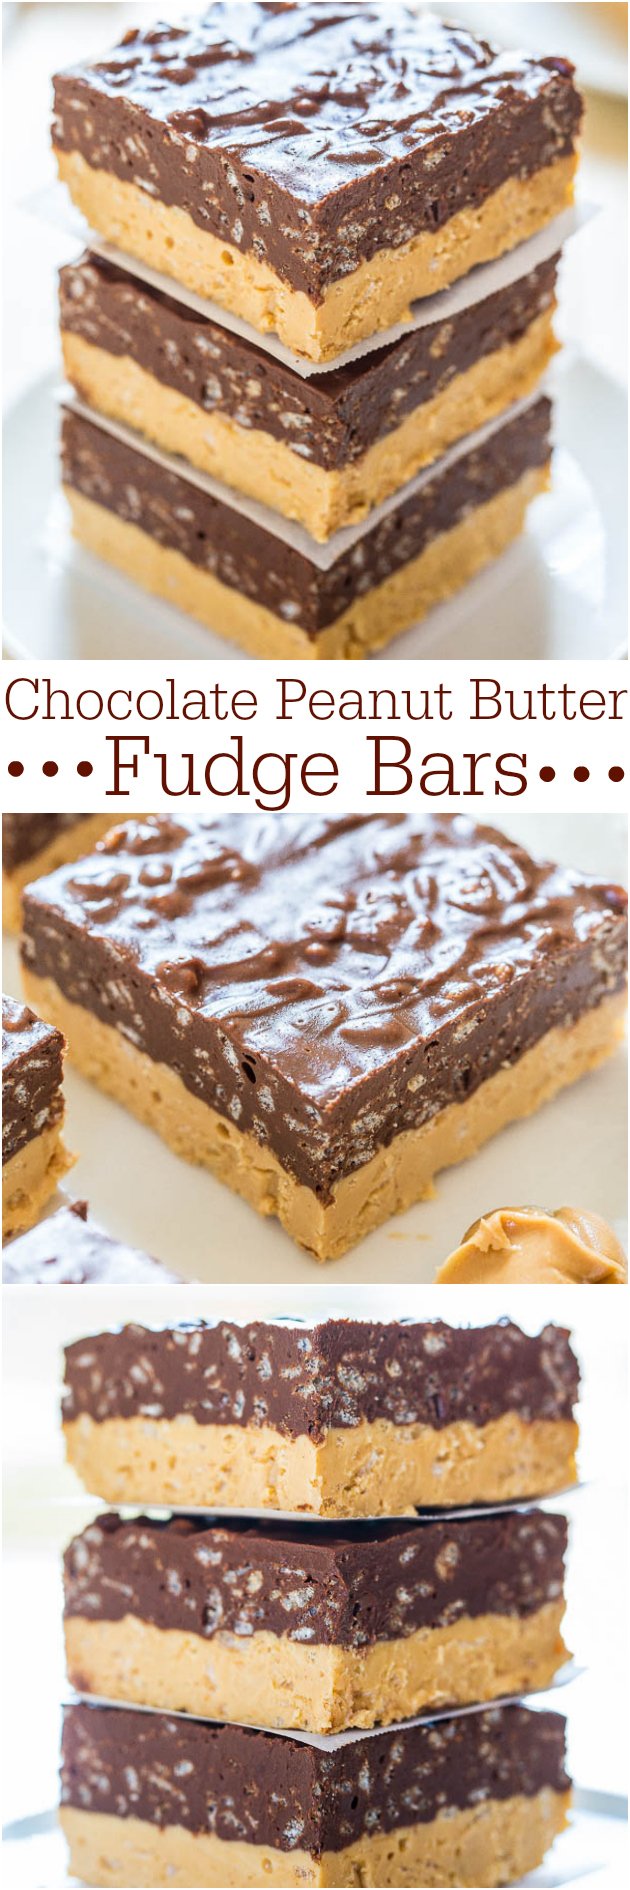 Chocolate Peanut Butter Fudge Bars — Can't decide if you want PB or chocolate? Make these easy no-bake fudge bars! Chocolate + PB is sooo irresistible!!